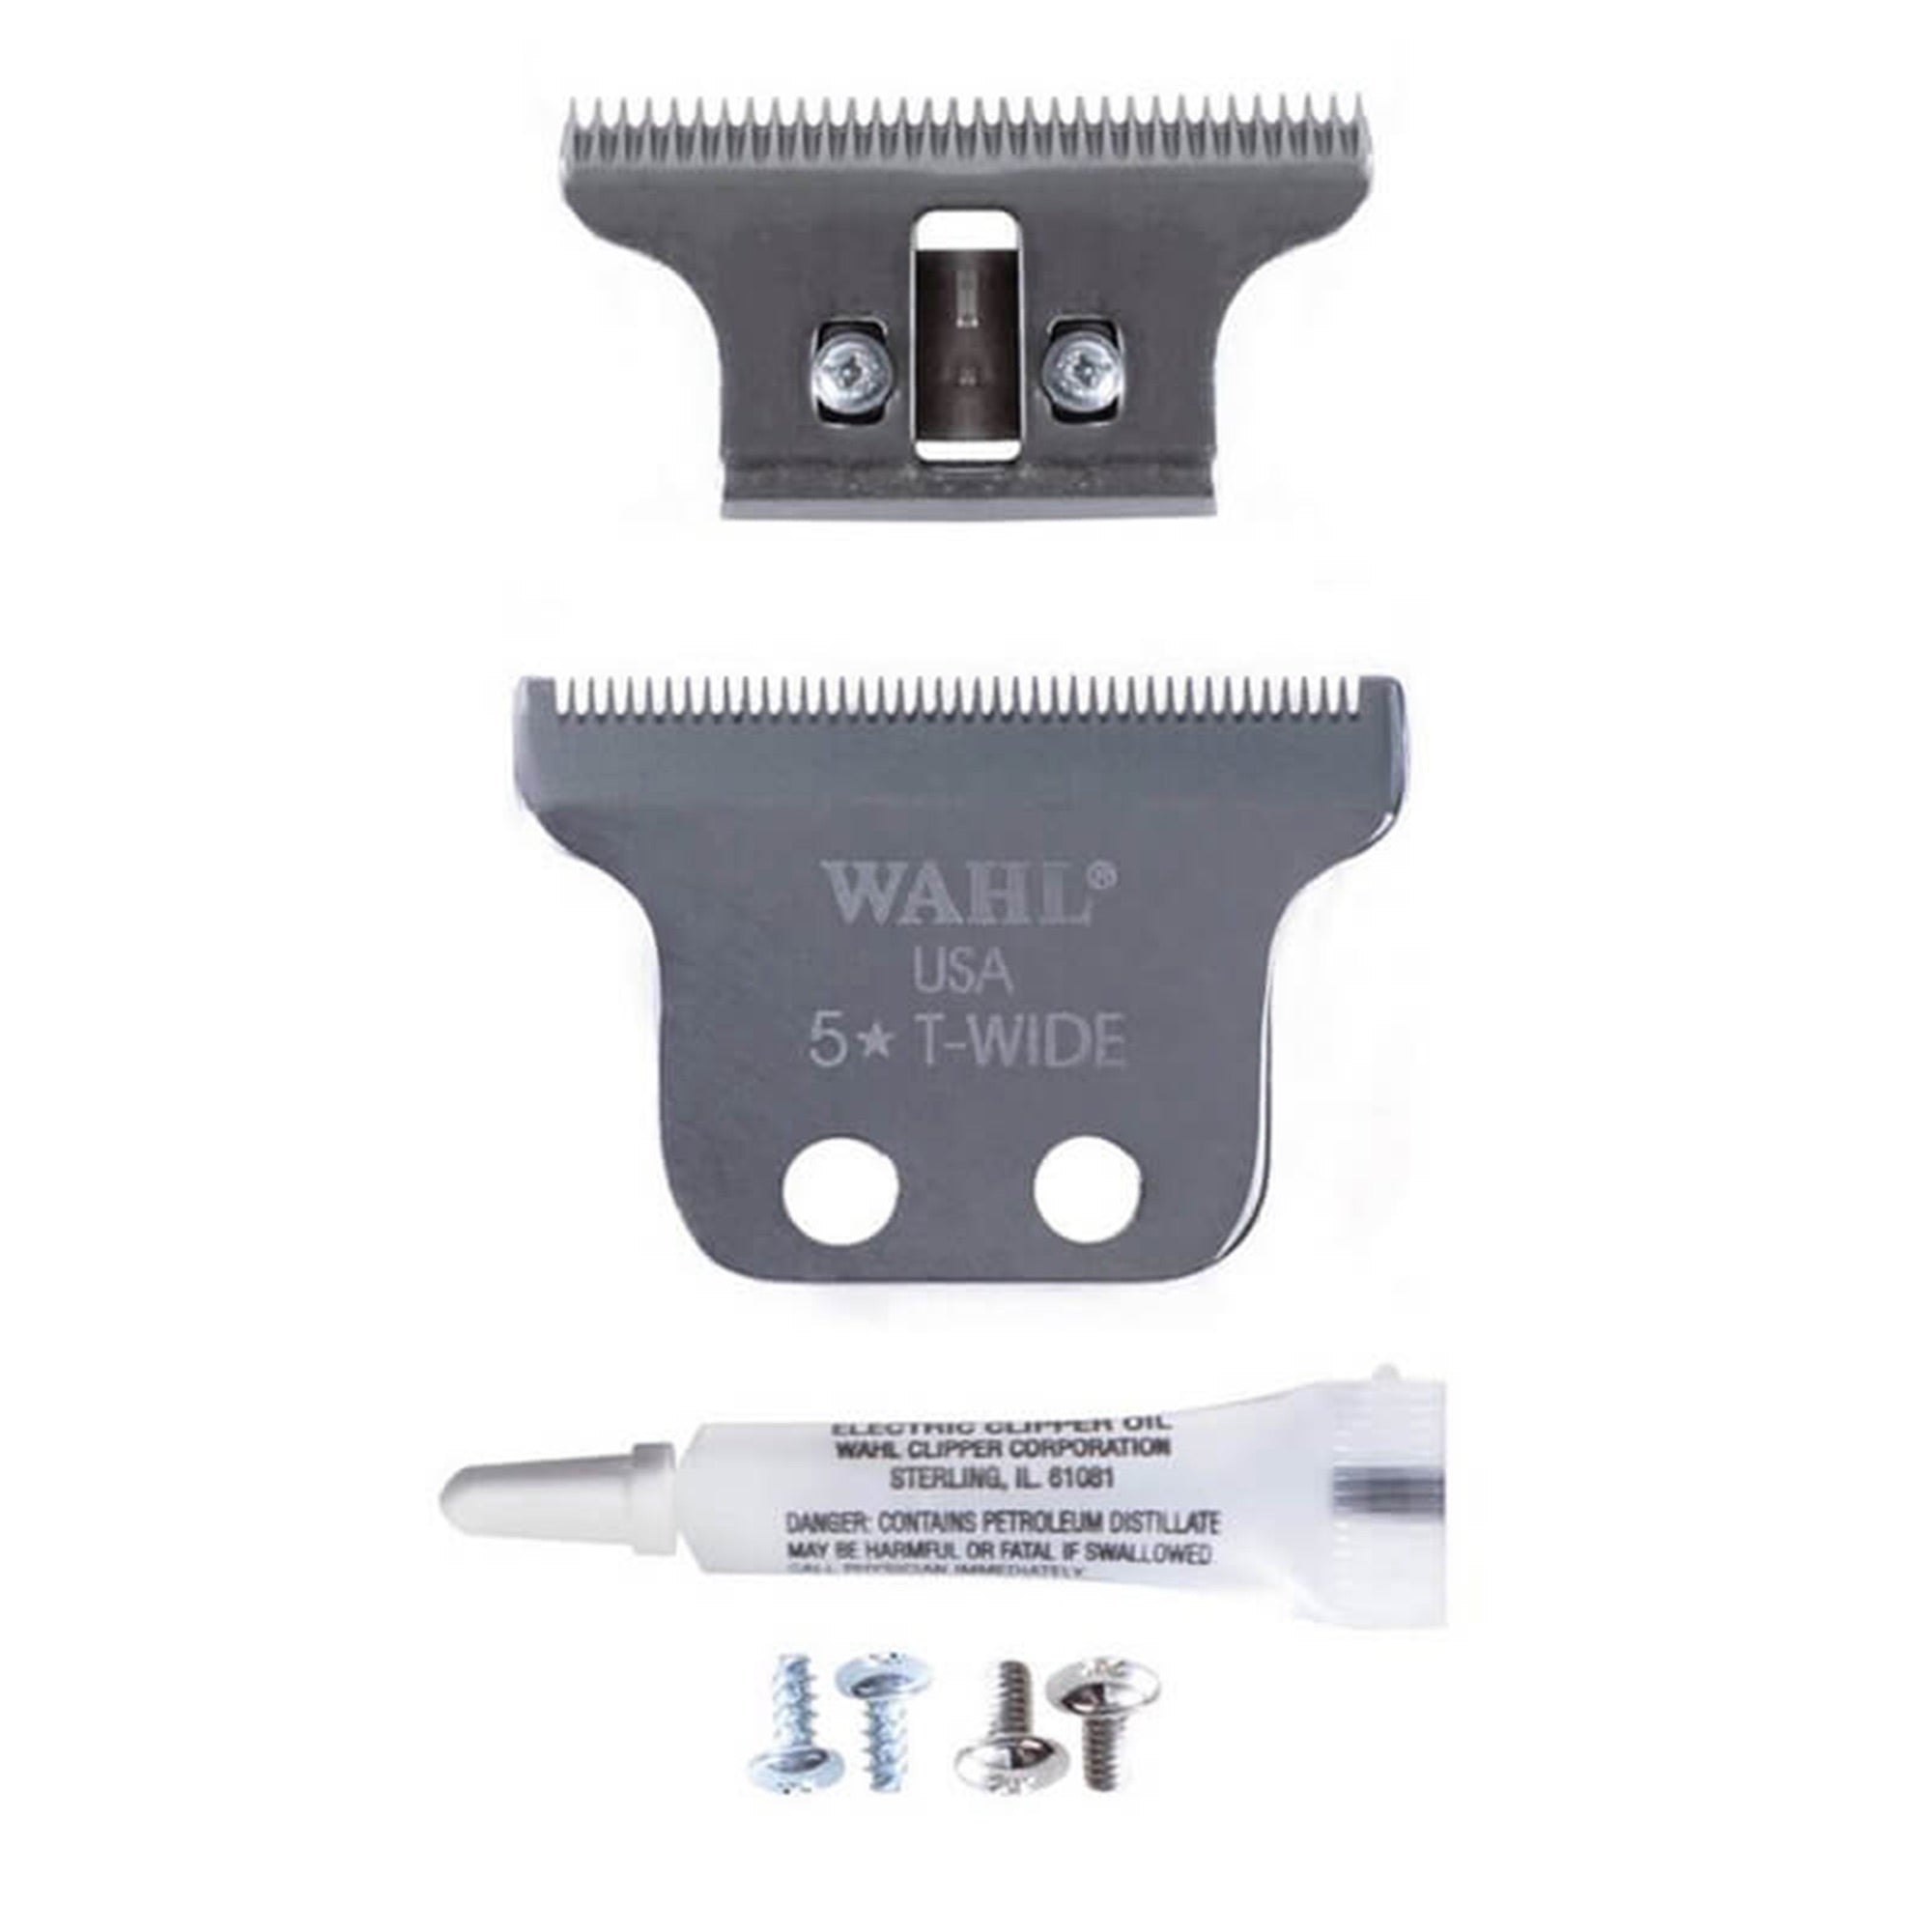 Wahl - 2215-1101 2 Hole Extra Wide Trimmer Blade